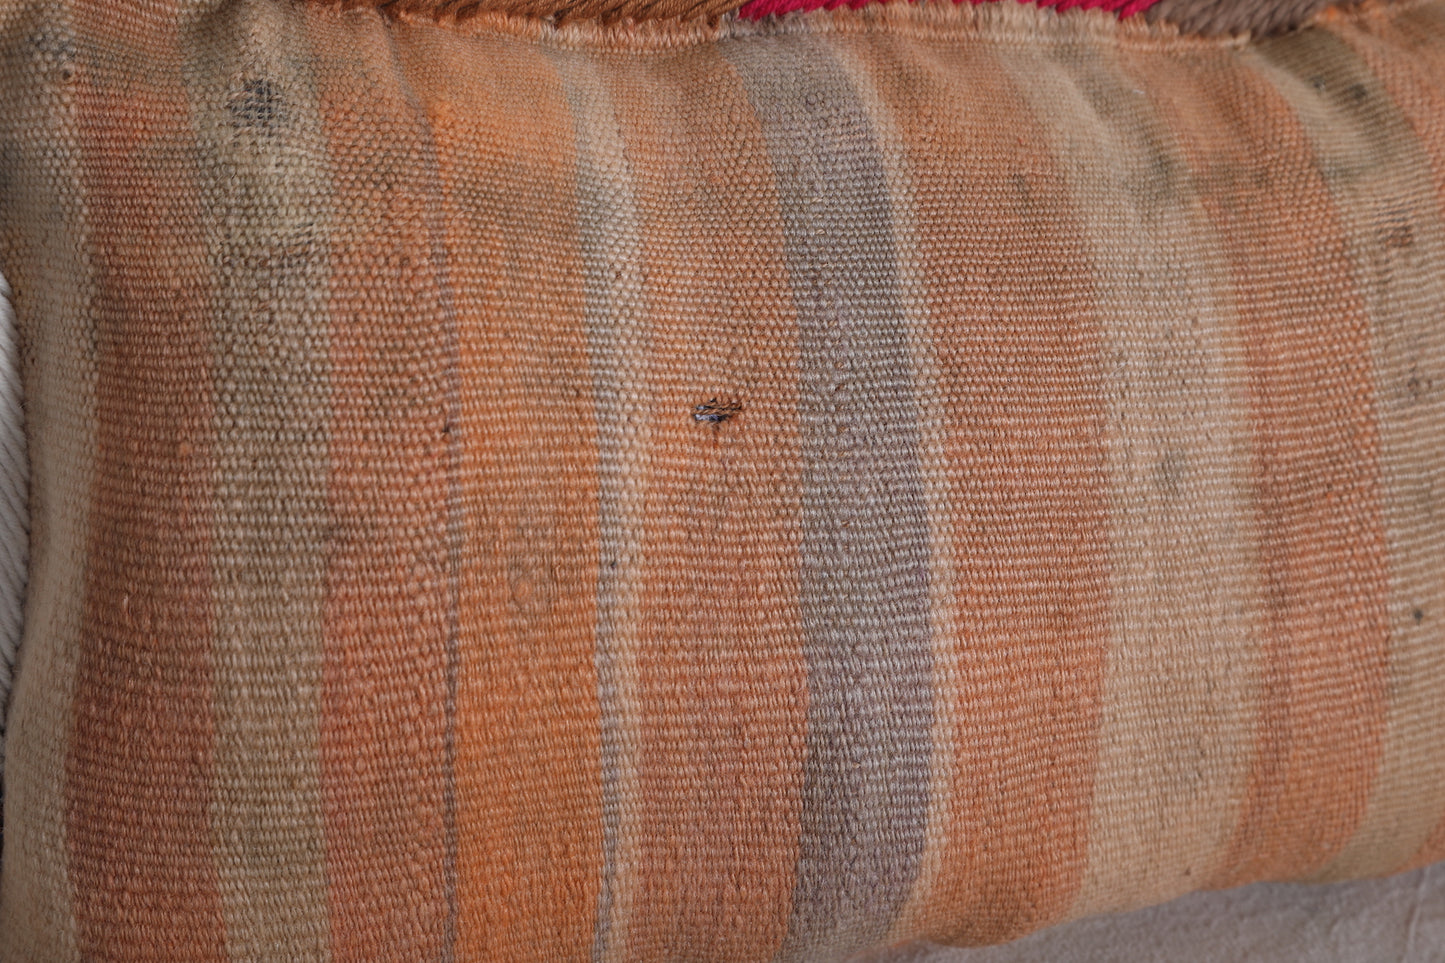 Long berber tribal pillow 12.9 INCHES X 22.4 INCHES